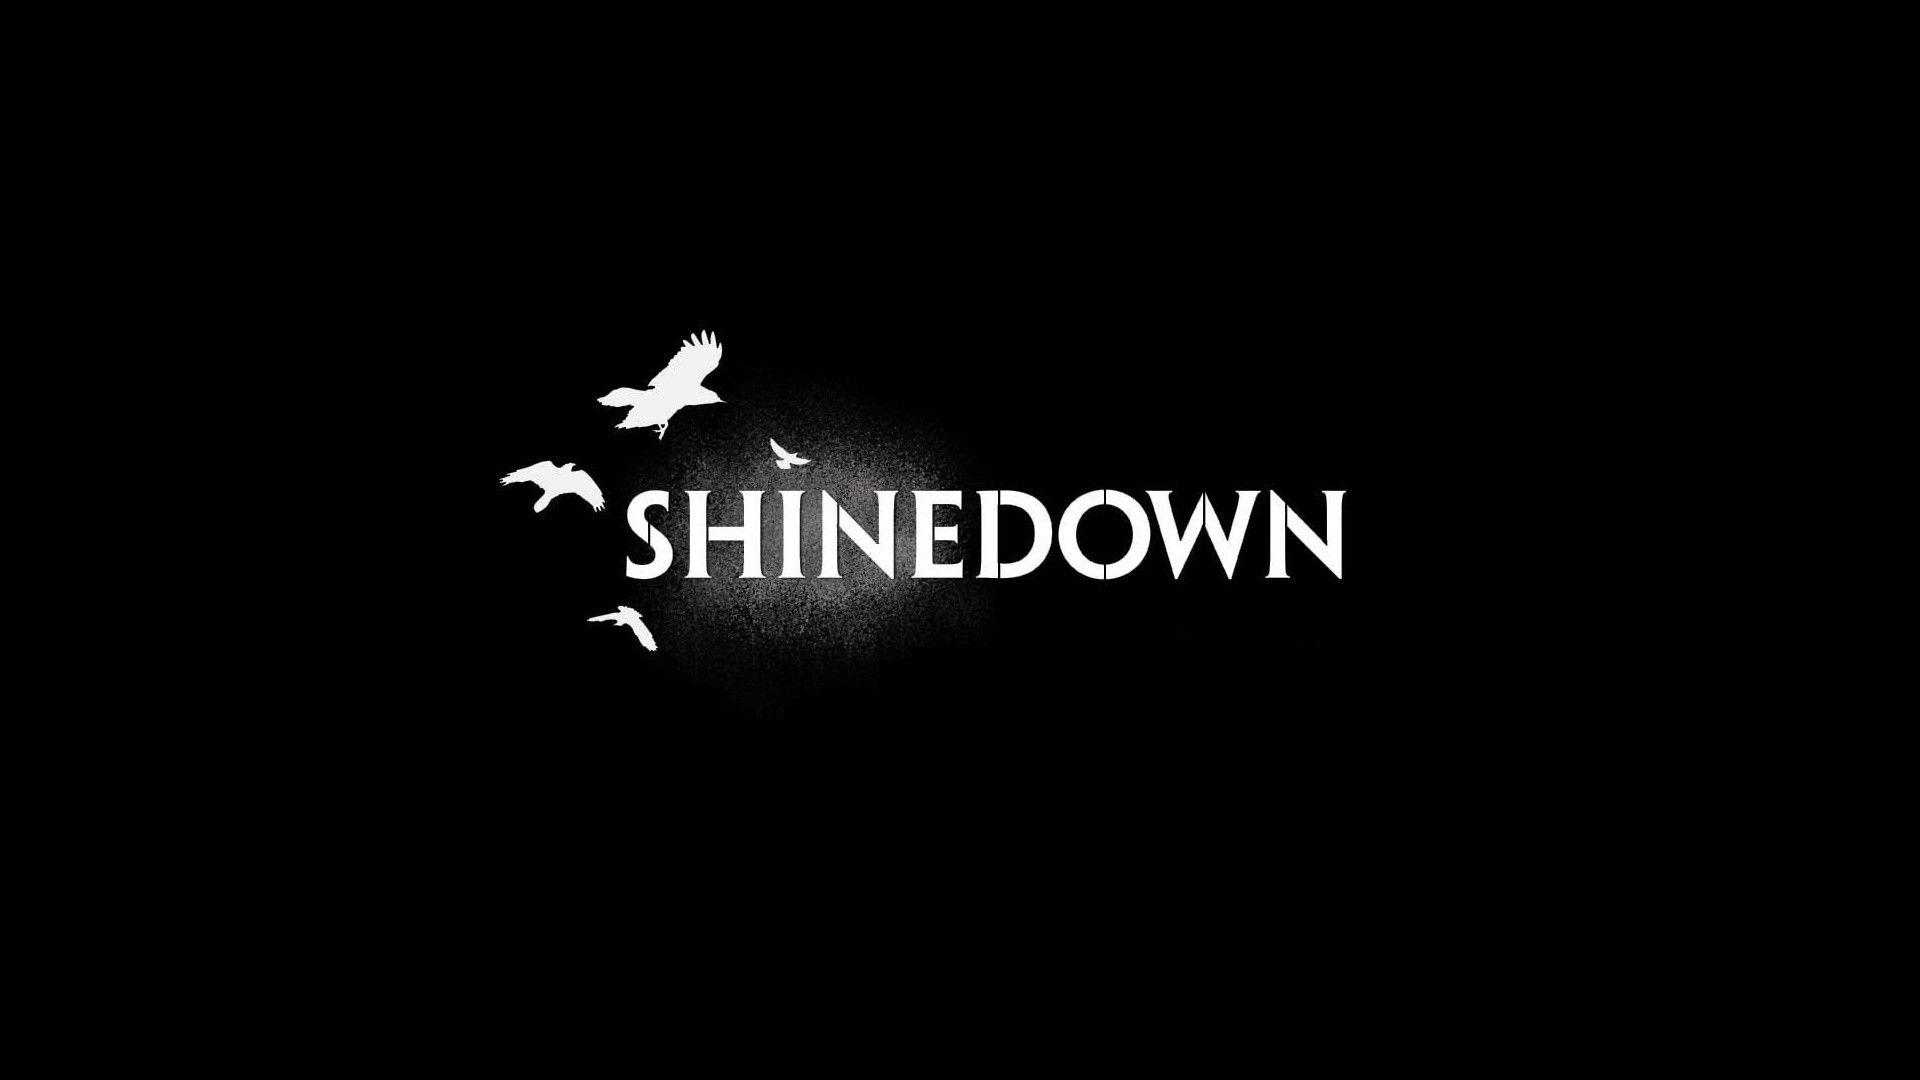 Shinedown - Shinedown updated their cover photo.